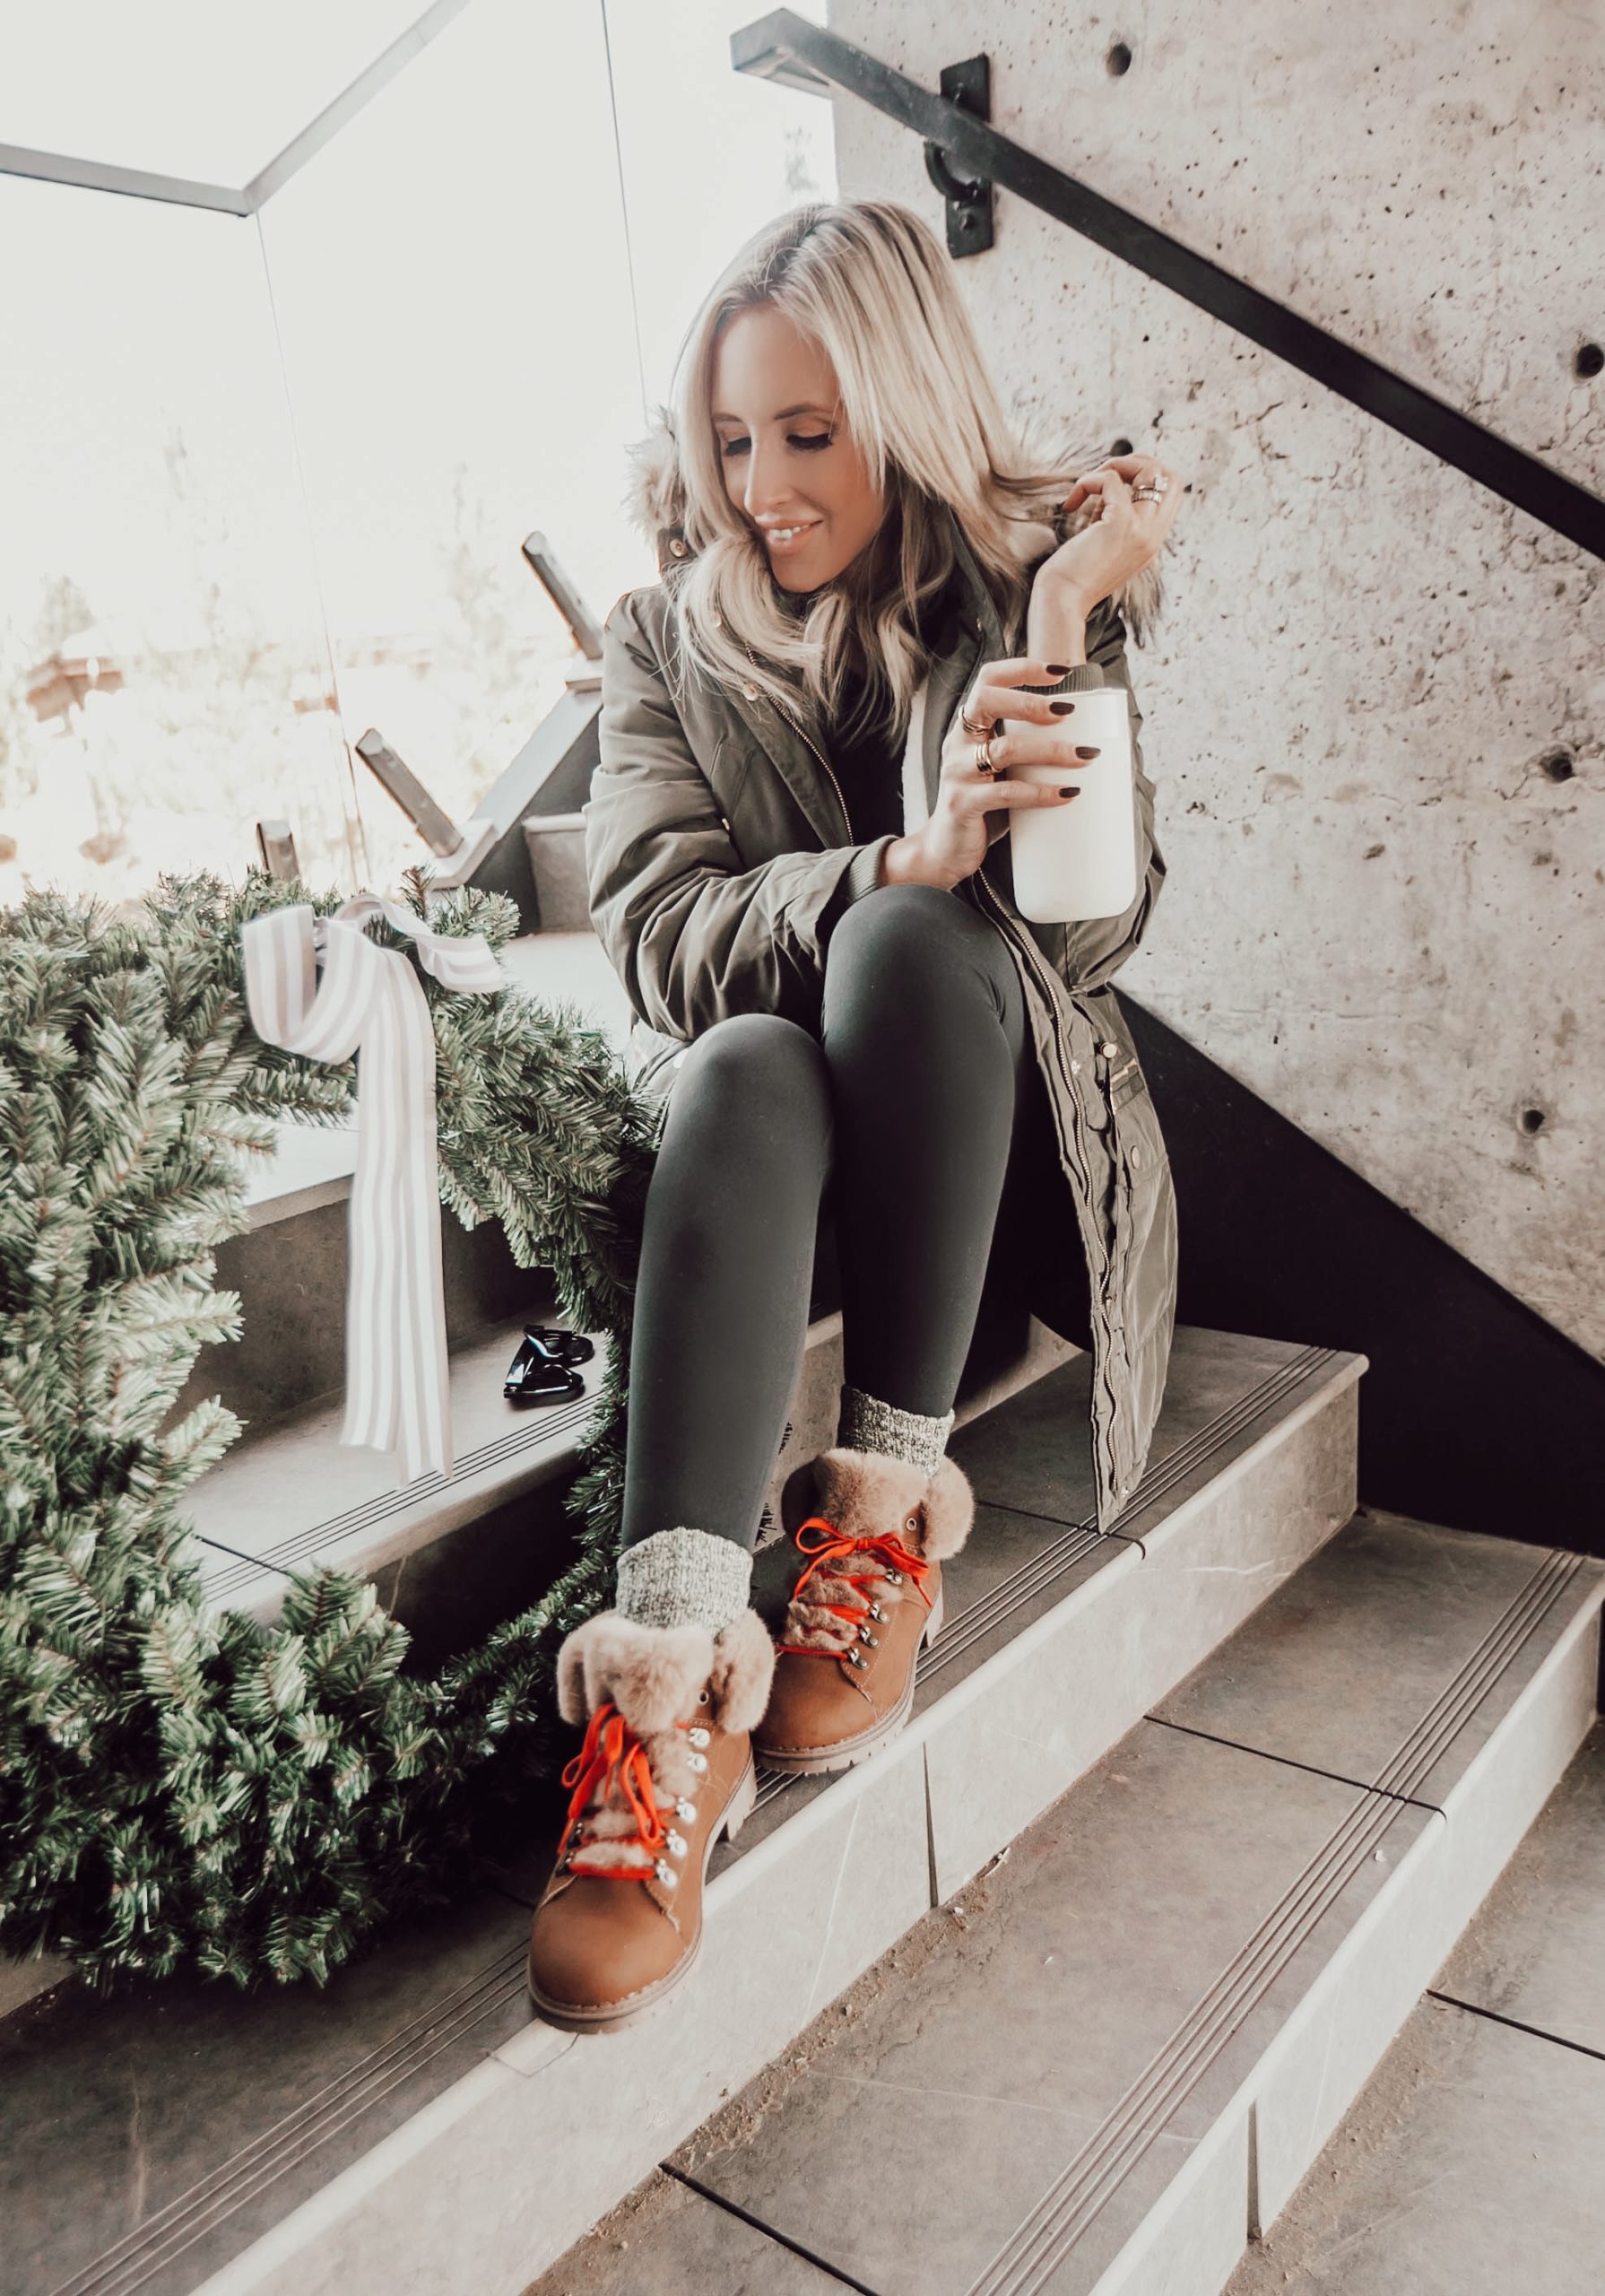 Ashley & Emily blog founder Emily Farren Wieczorek shares her Holiday Favorites - Under $50 - like these red laced boots!